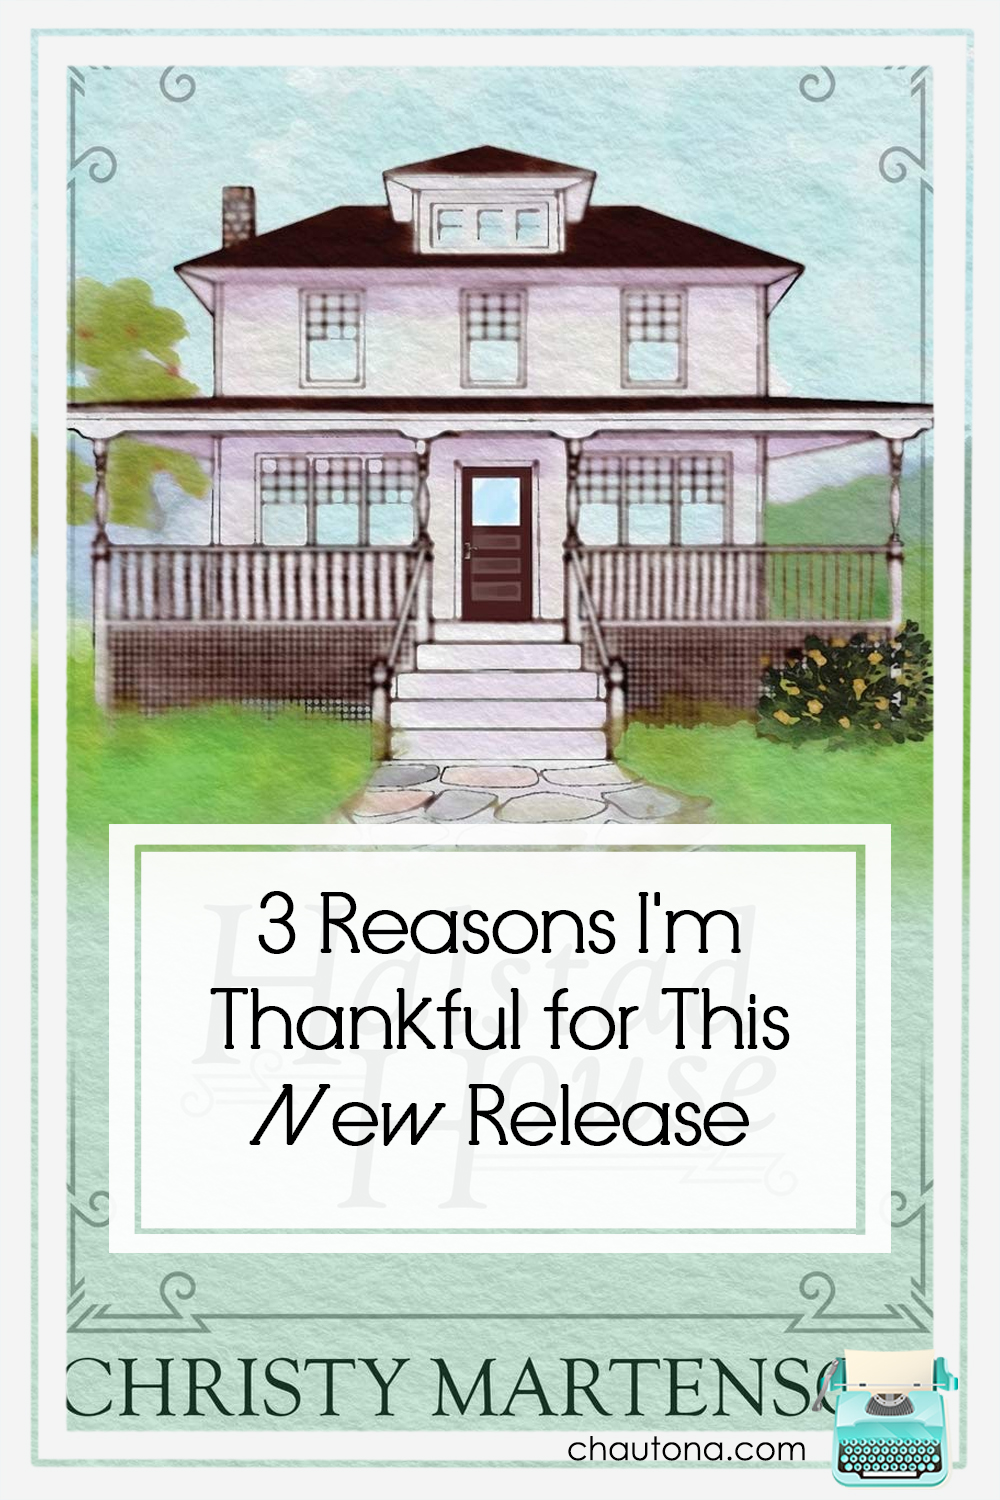 3 Reasons I'm Thankful for This New Release